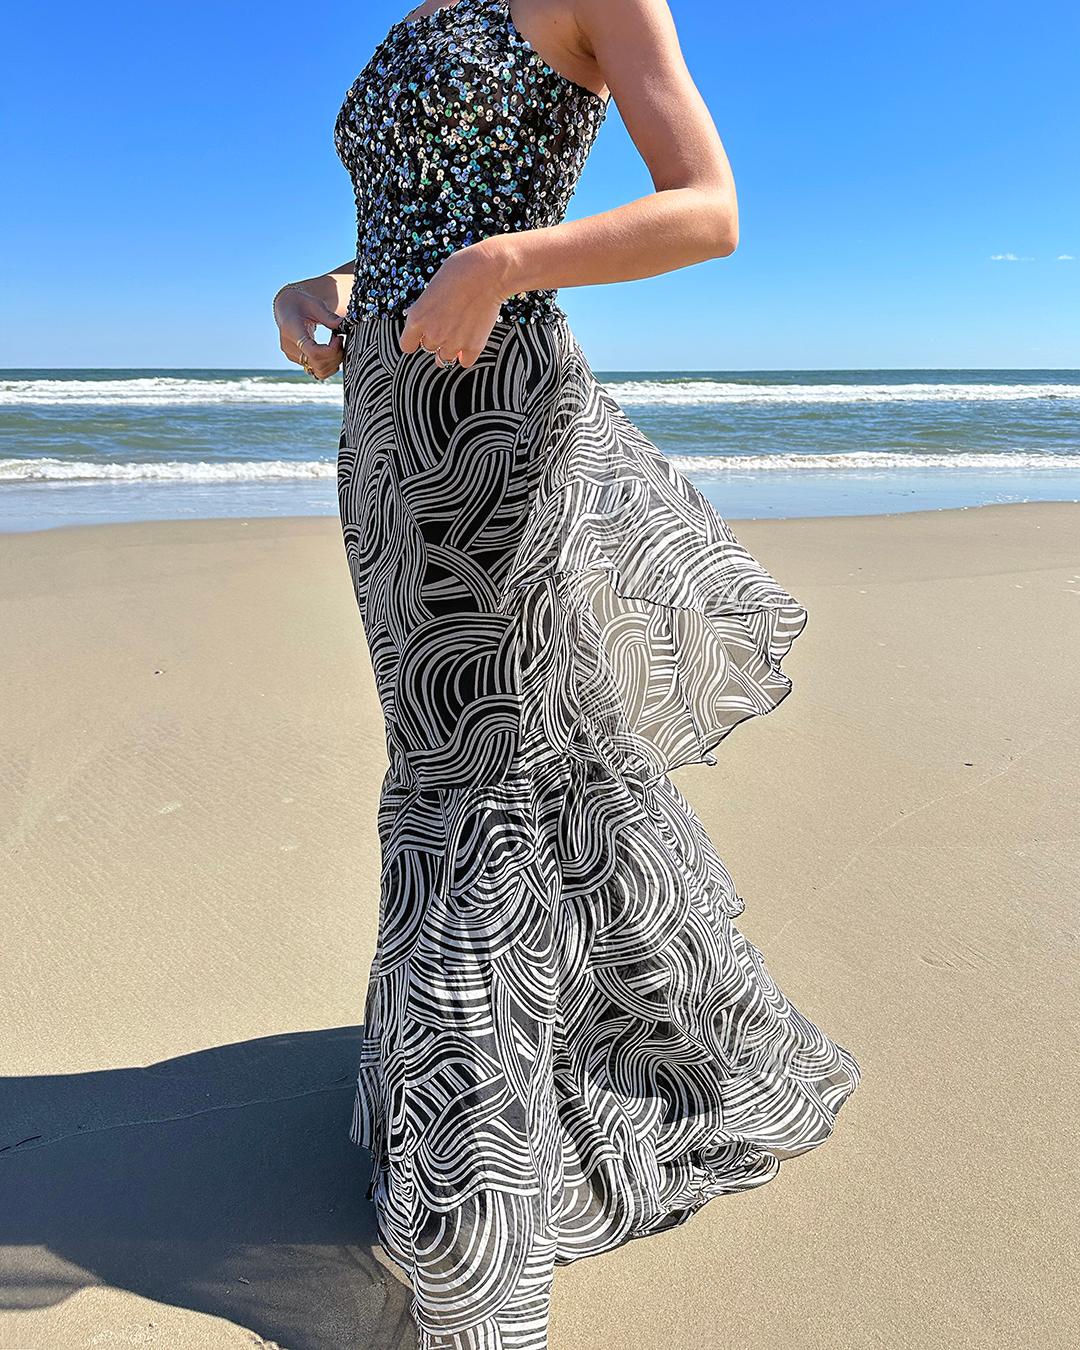 THIS is how you do a mermaid skirt. Made by Carolina Herrera for her CH label in the early 2000s, is a perfect marriage of two things Carolina Herrera is so well known for: ball skirts, and mermaid silhouettes. Her deftness in the medium shows: this